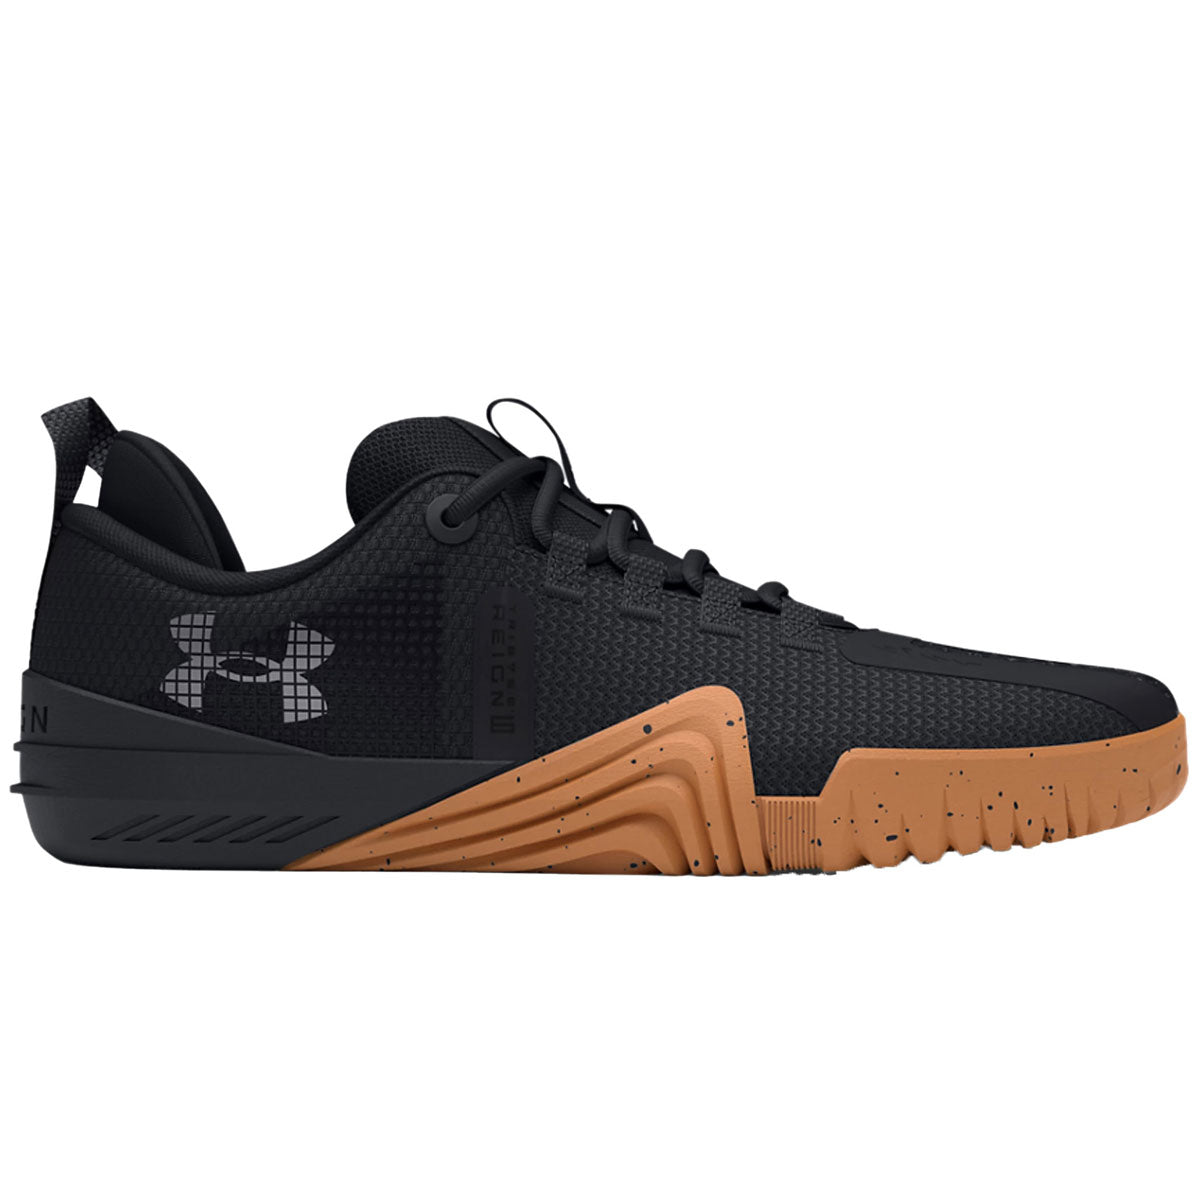 Under Armour TriBase Reign 6 Training Shoes - Mens - Black/Anthracite/Metallic Silver